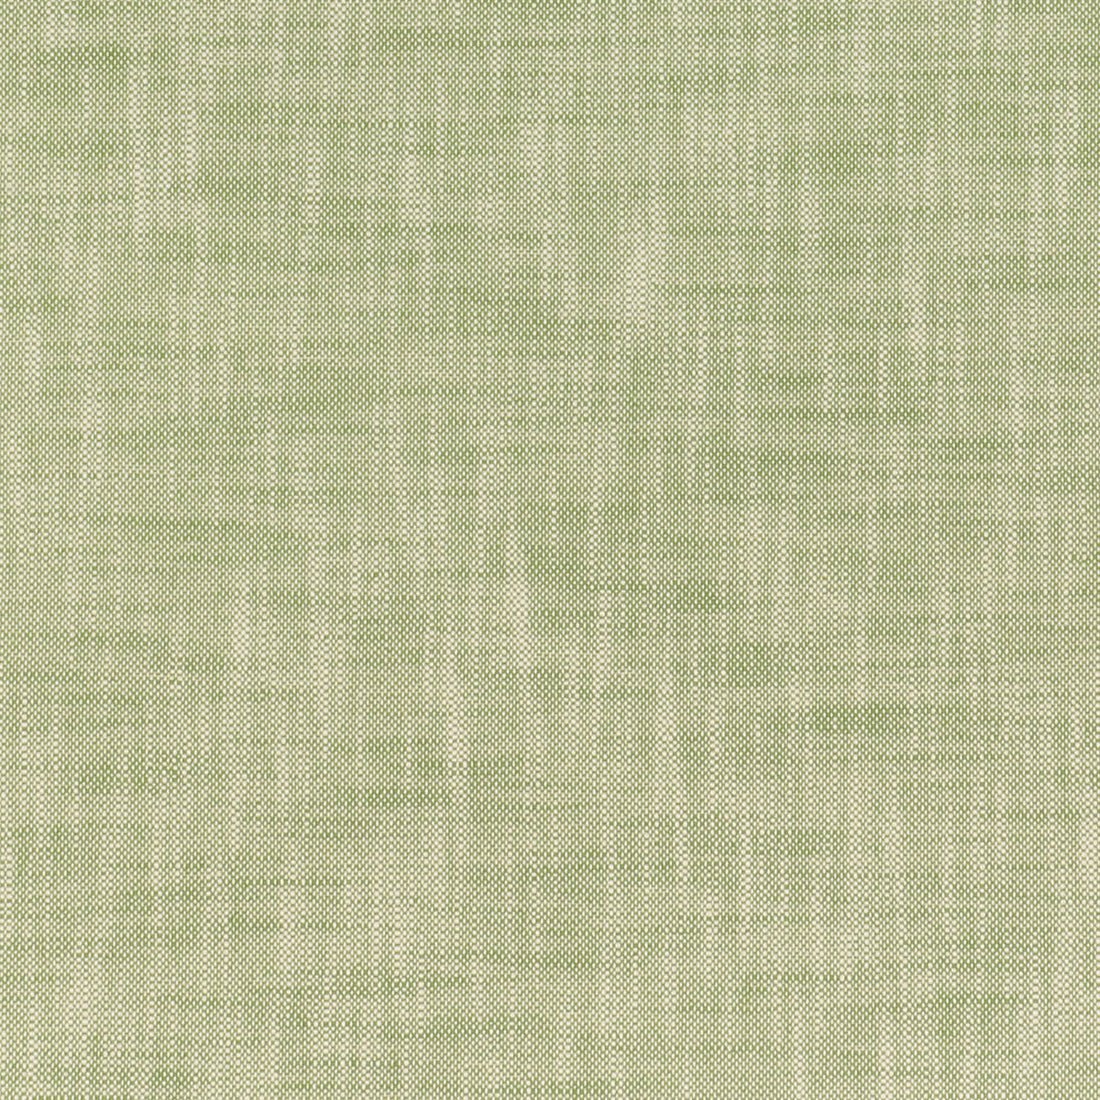 Kravet Smart fabric in 35517-3 color - pattern 35517.3.0 - by Kravet Smart in the Inside Out Performance Fabrics collection